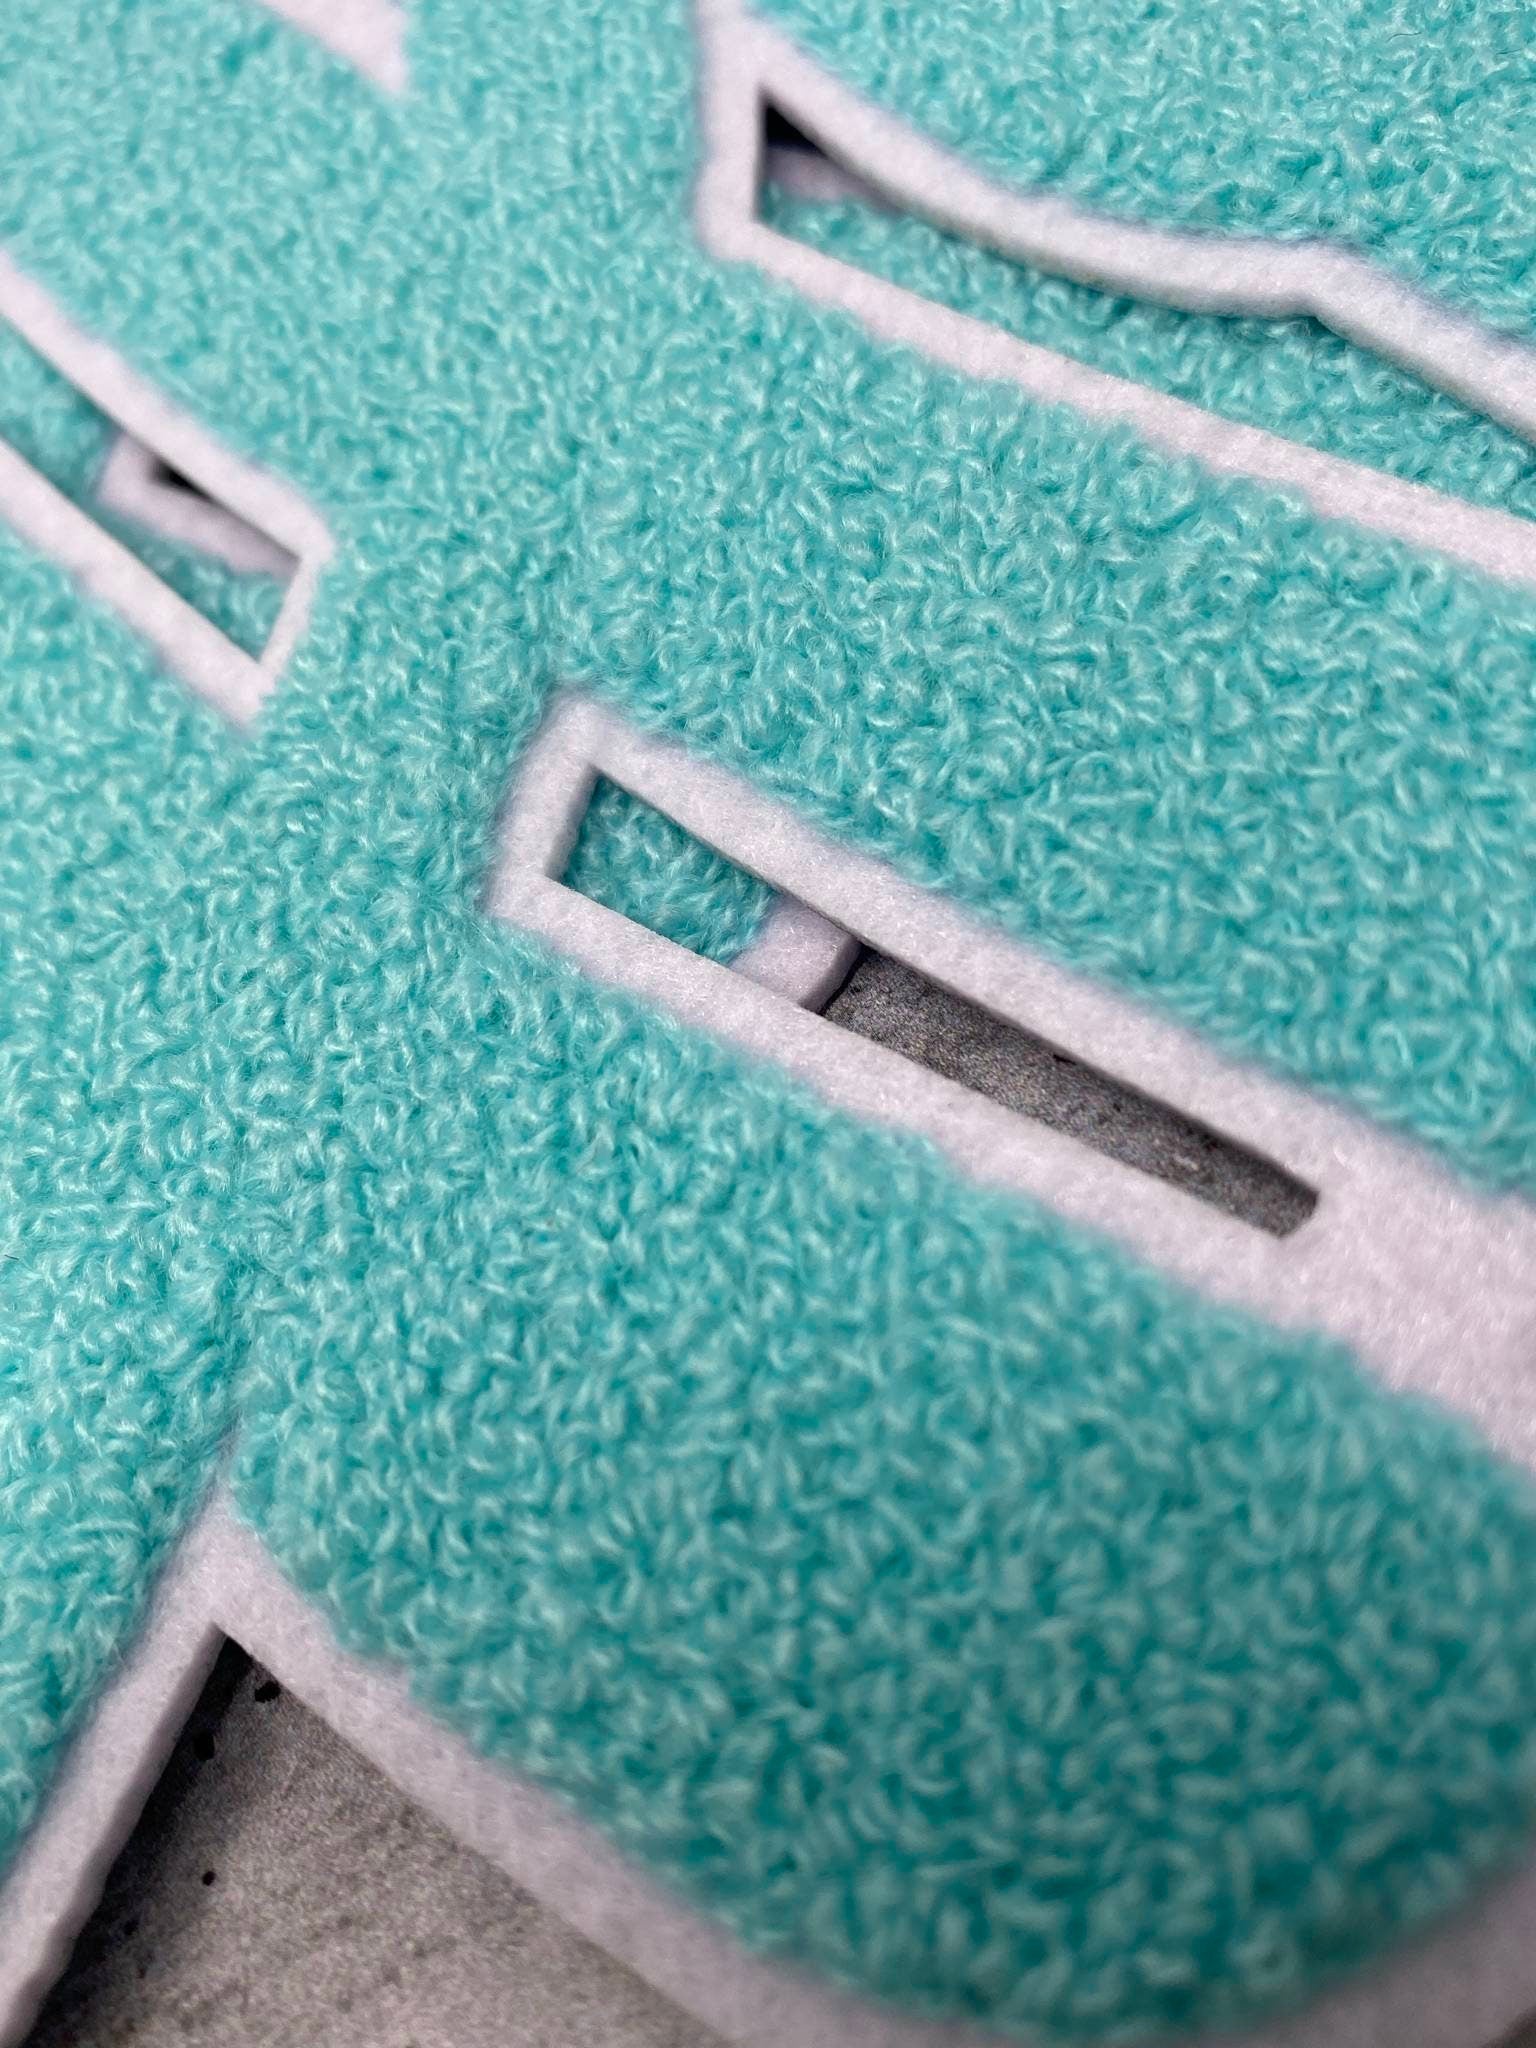 Exclusive, Tiffany Blue & White "Hustle" Chenille Patch (iron-on) Size 10"x8", Varsity Patch for Denim, Shirts and Hoodies, Large Patch